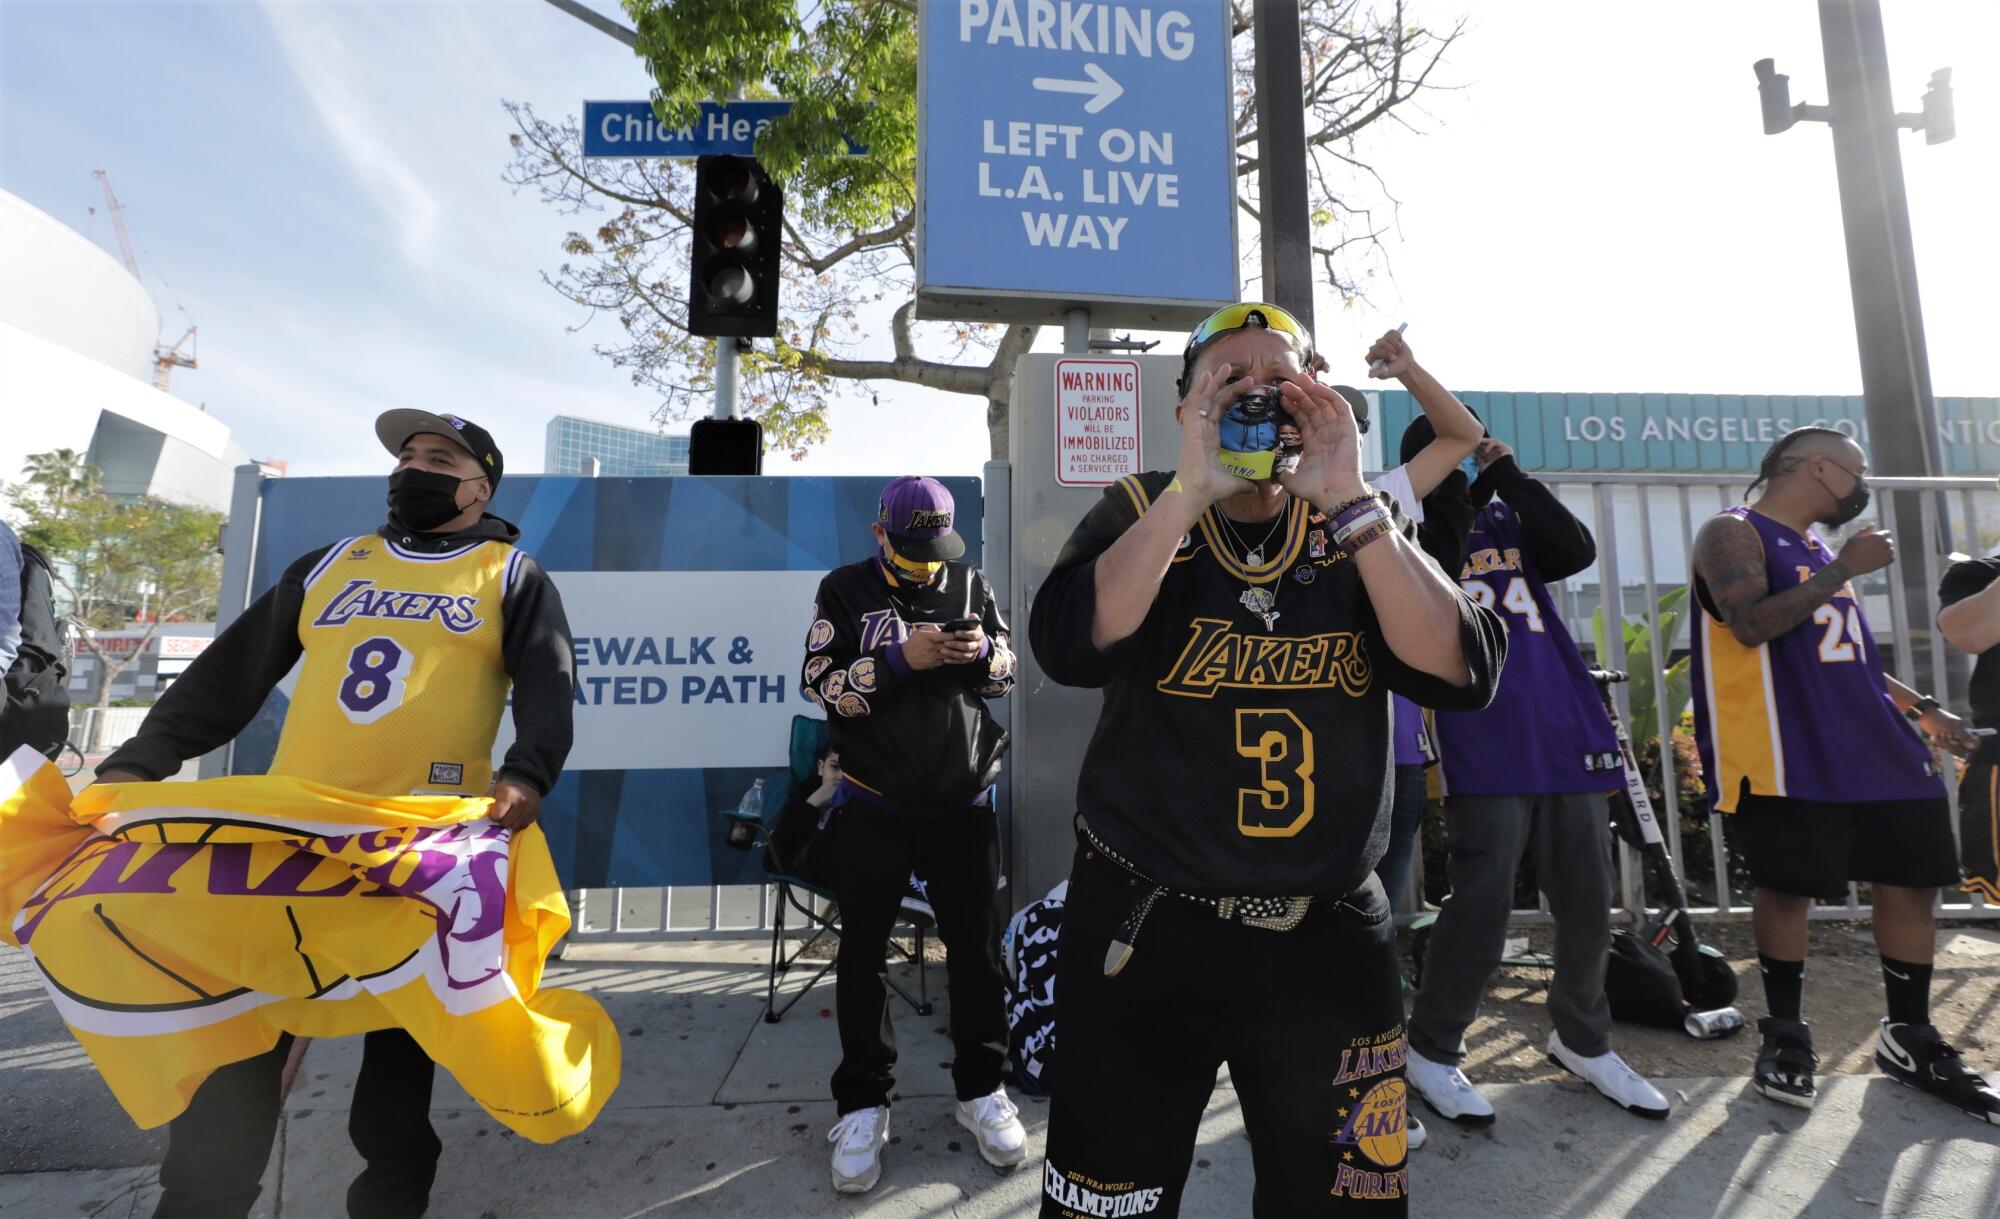 Lakers Games: Who Sits Where (map) – The Hollywood Reporter